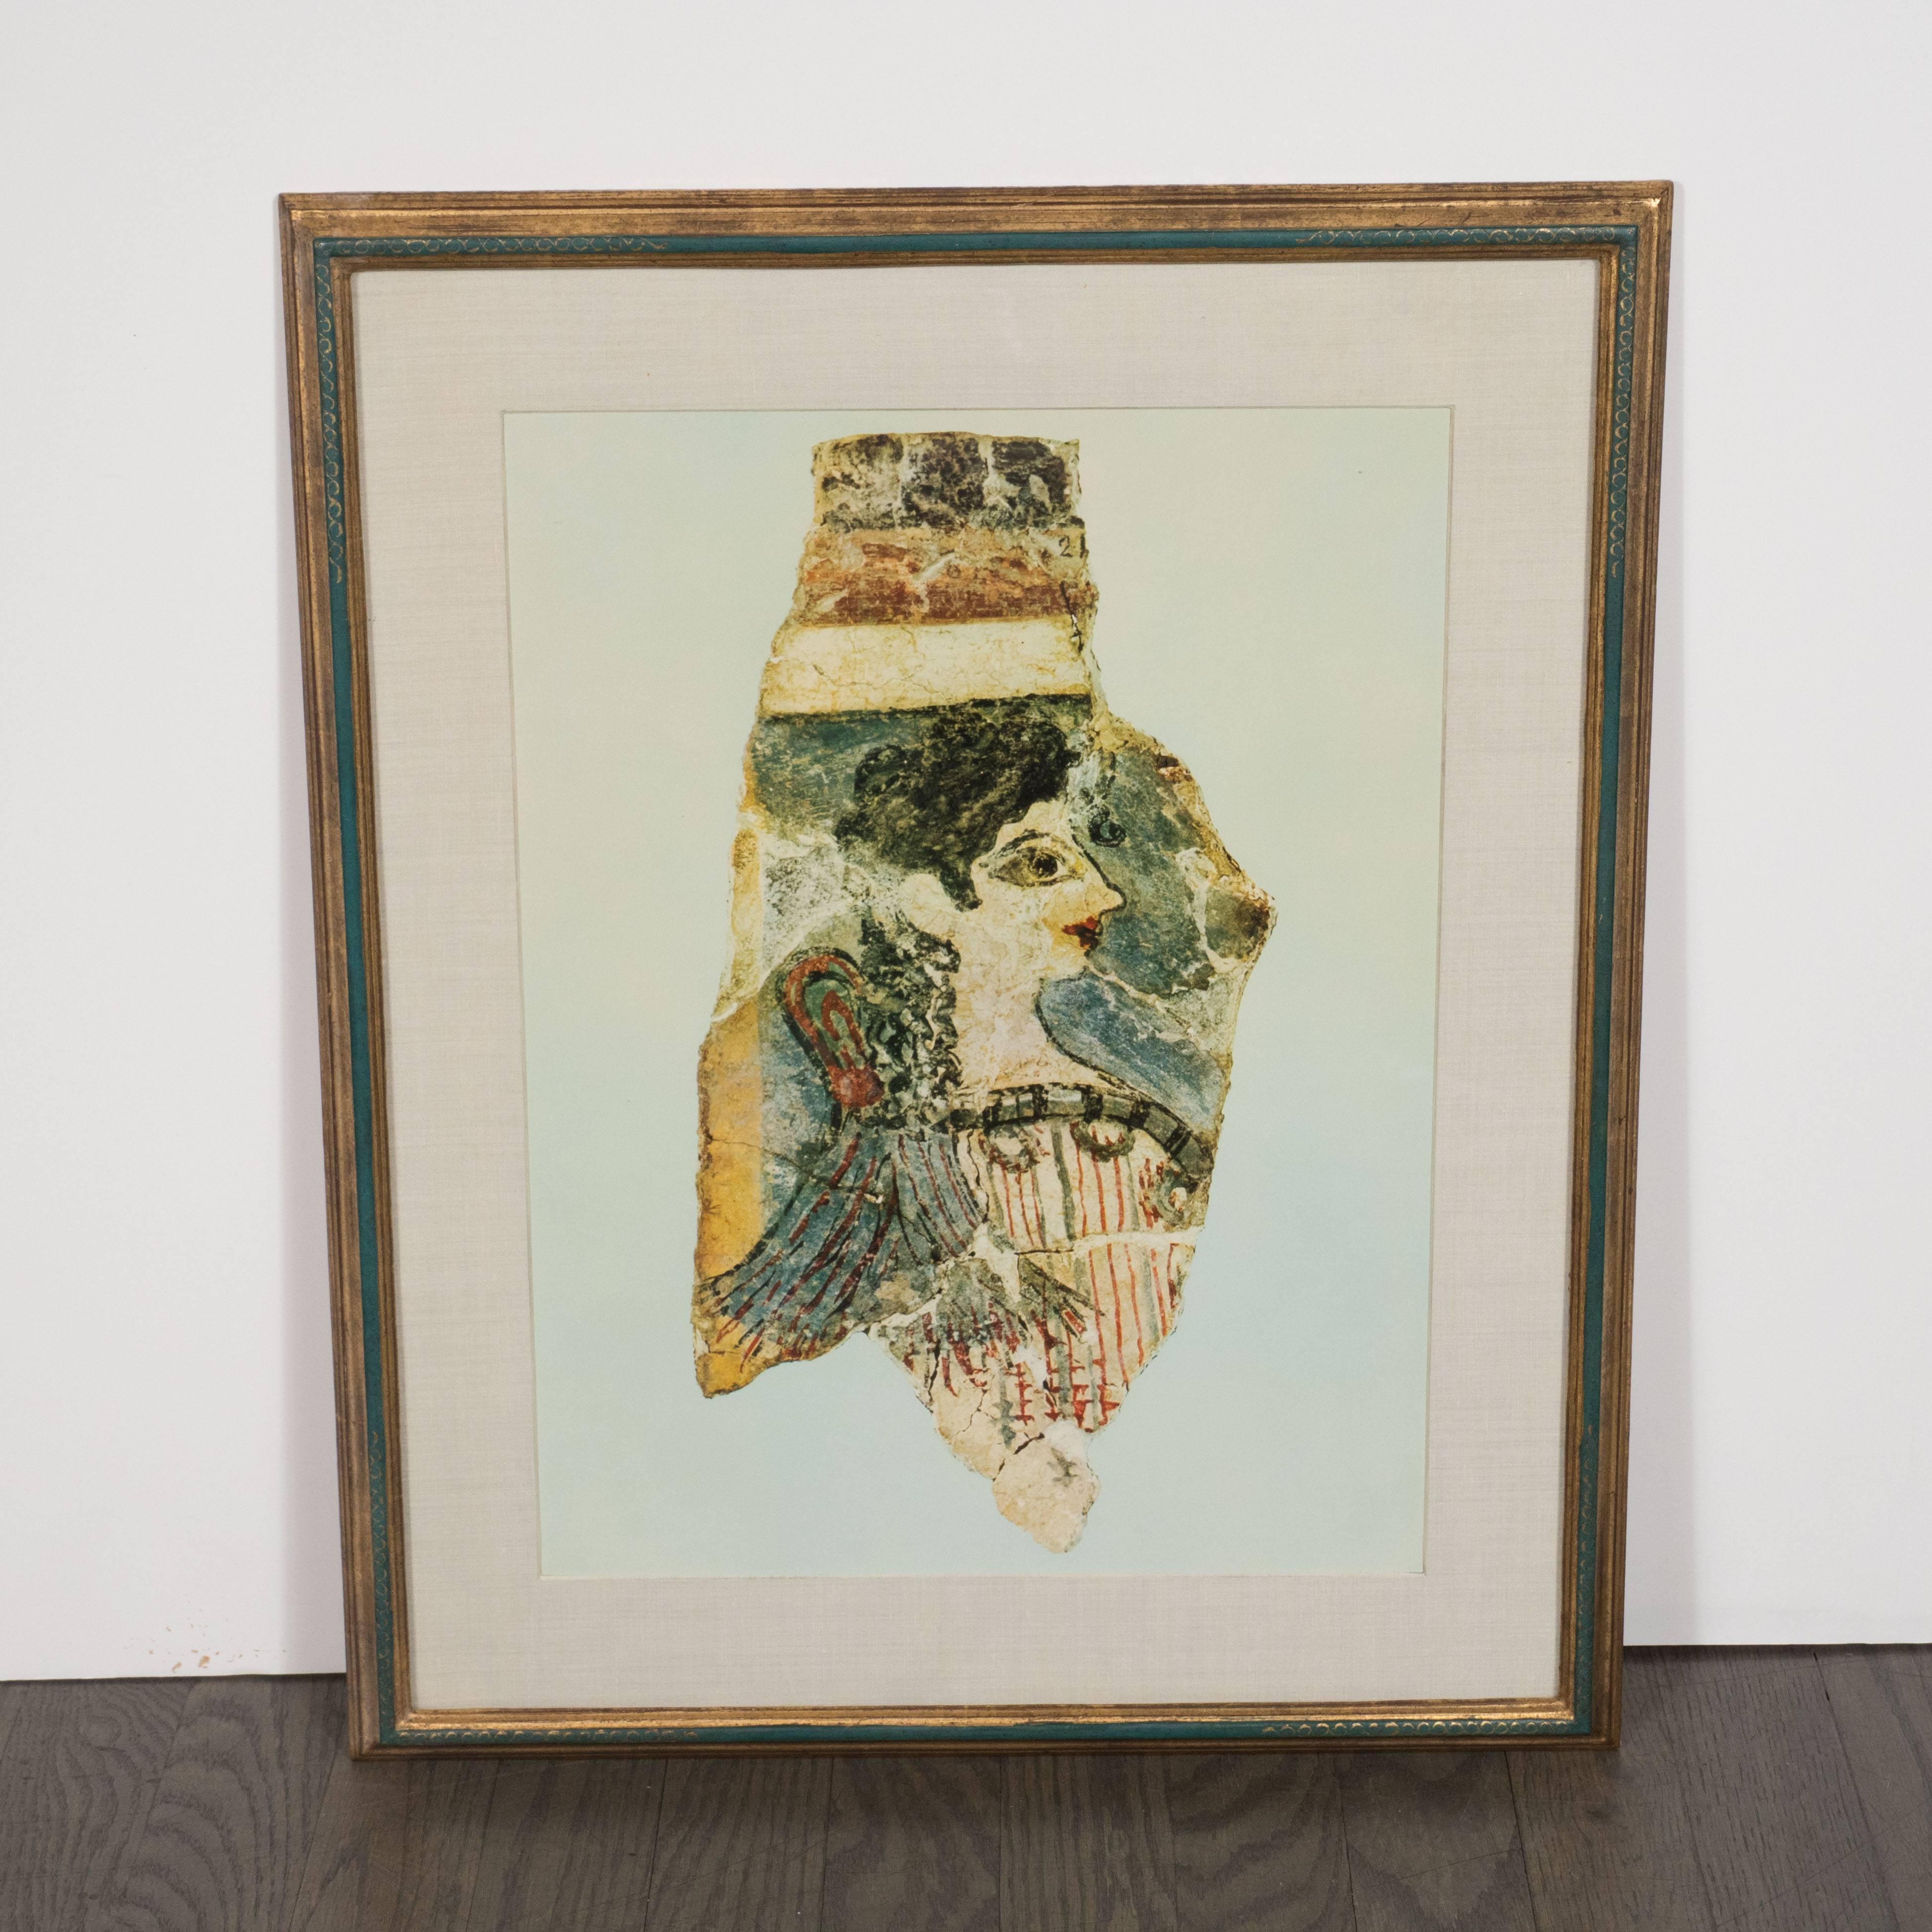 This sophisticated print features a female figure on what appears to be a chard of ancient pottery culled from Greek ruins, against a white background. With its earthy palette with hints of sea foam and coral, this print would be a winning wall